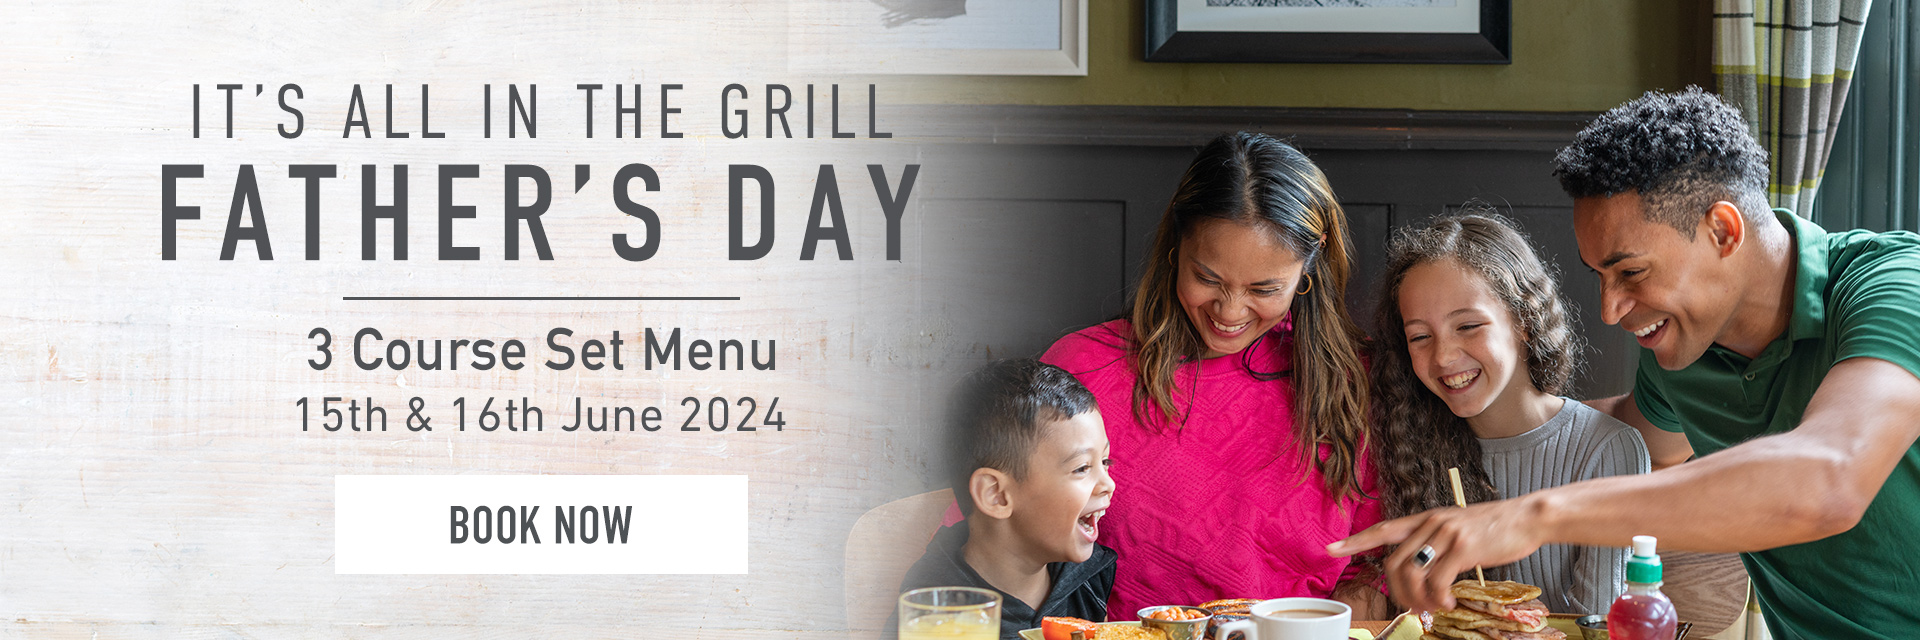 Father’s Day at Harvester Poole